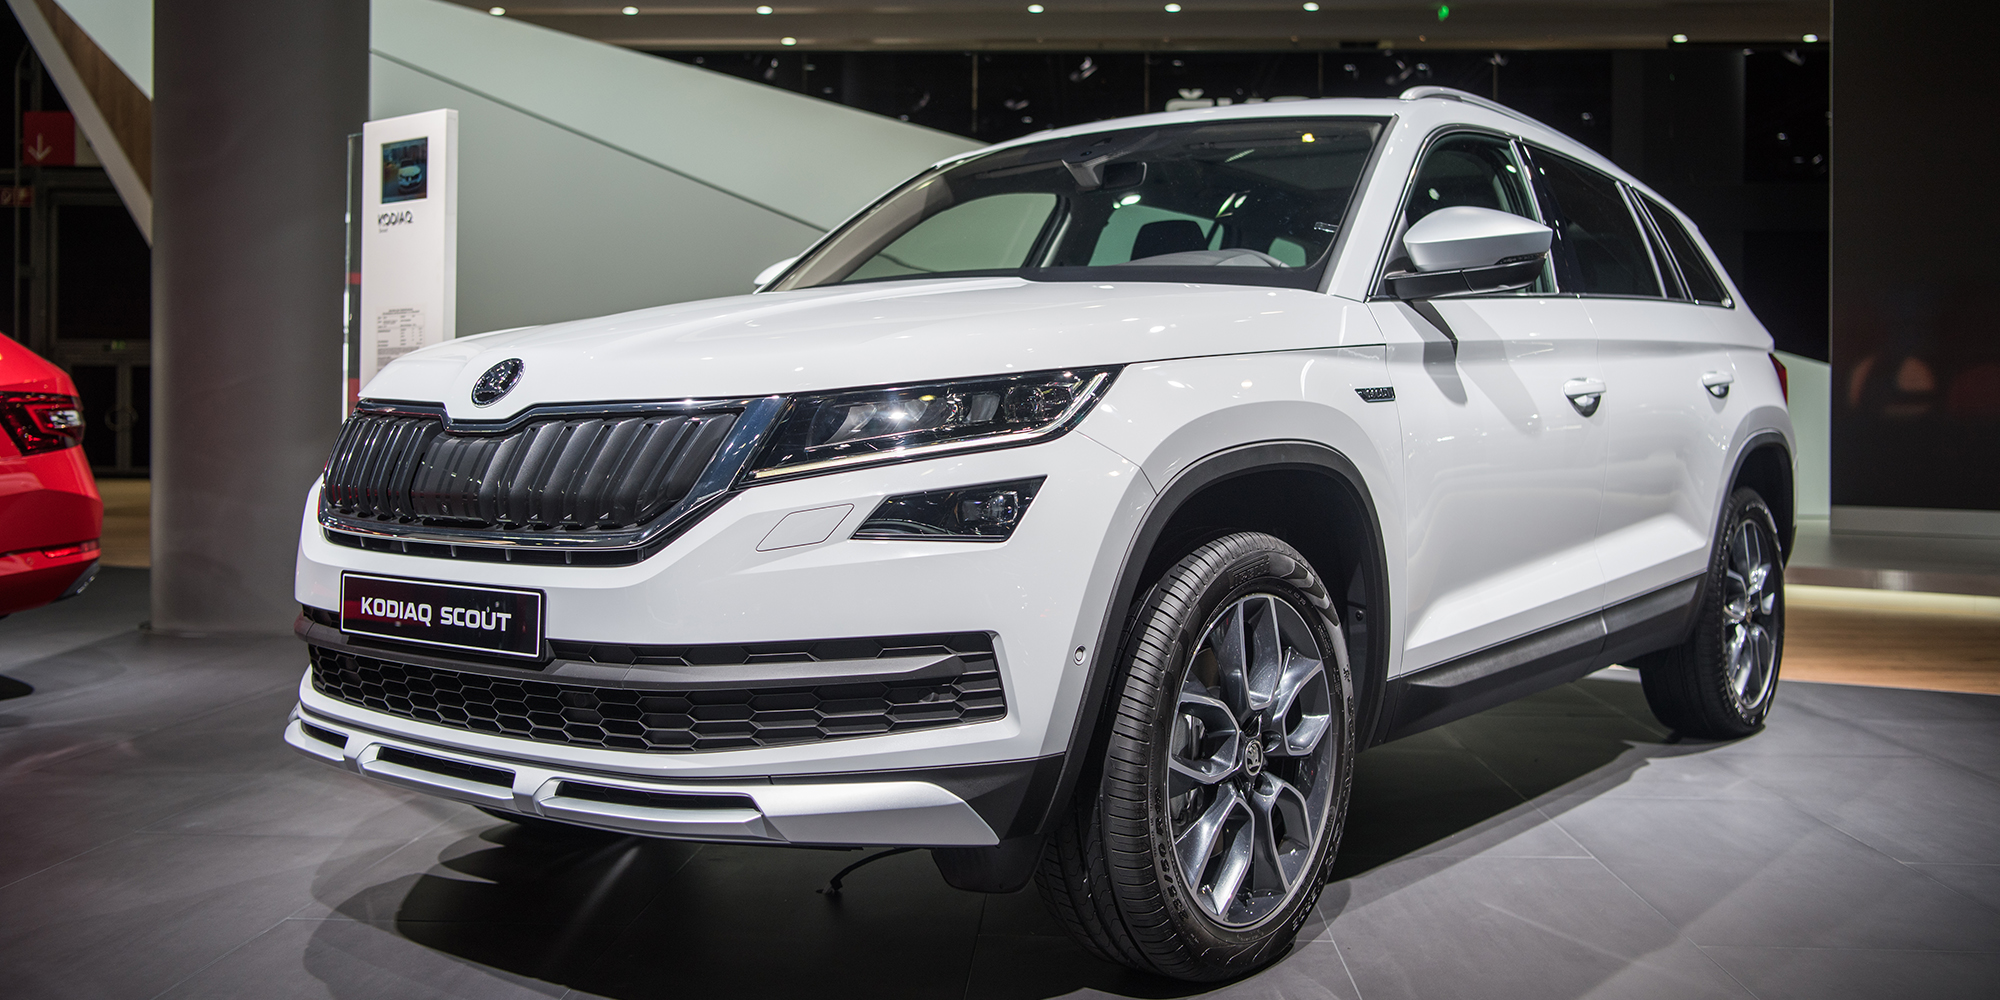 Skoda Kodiaq Scout confirmed for India, arriving in Q4 2019 - Report